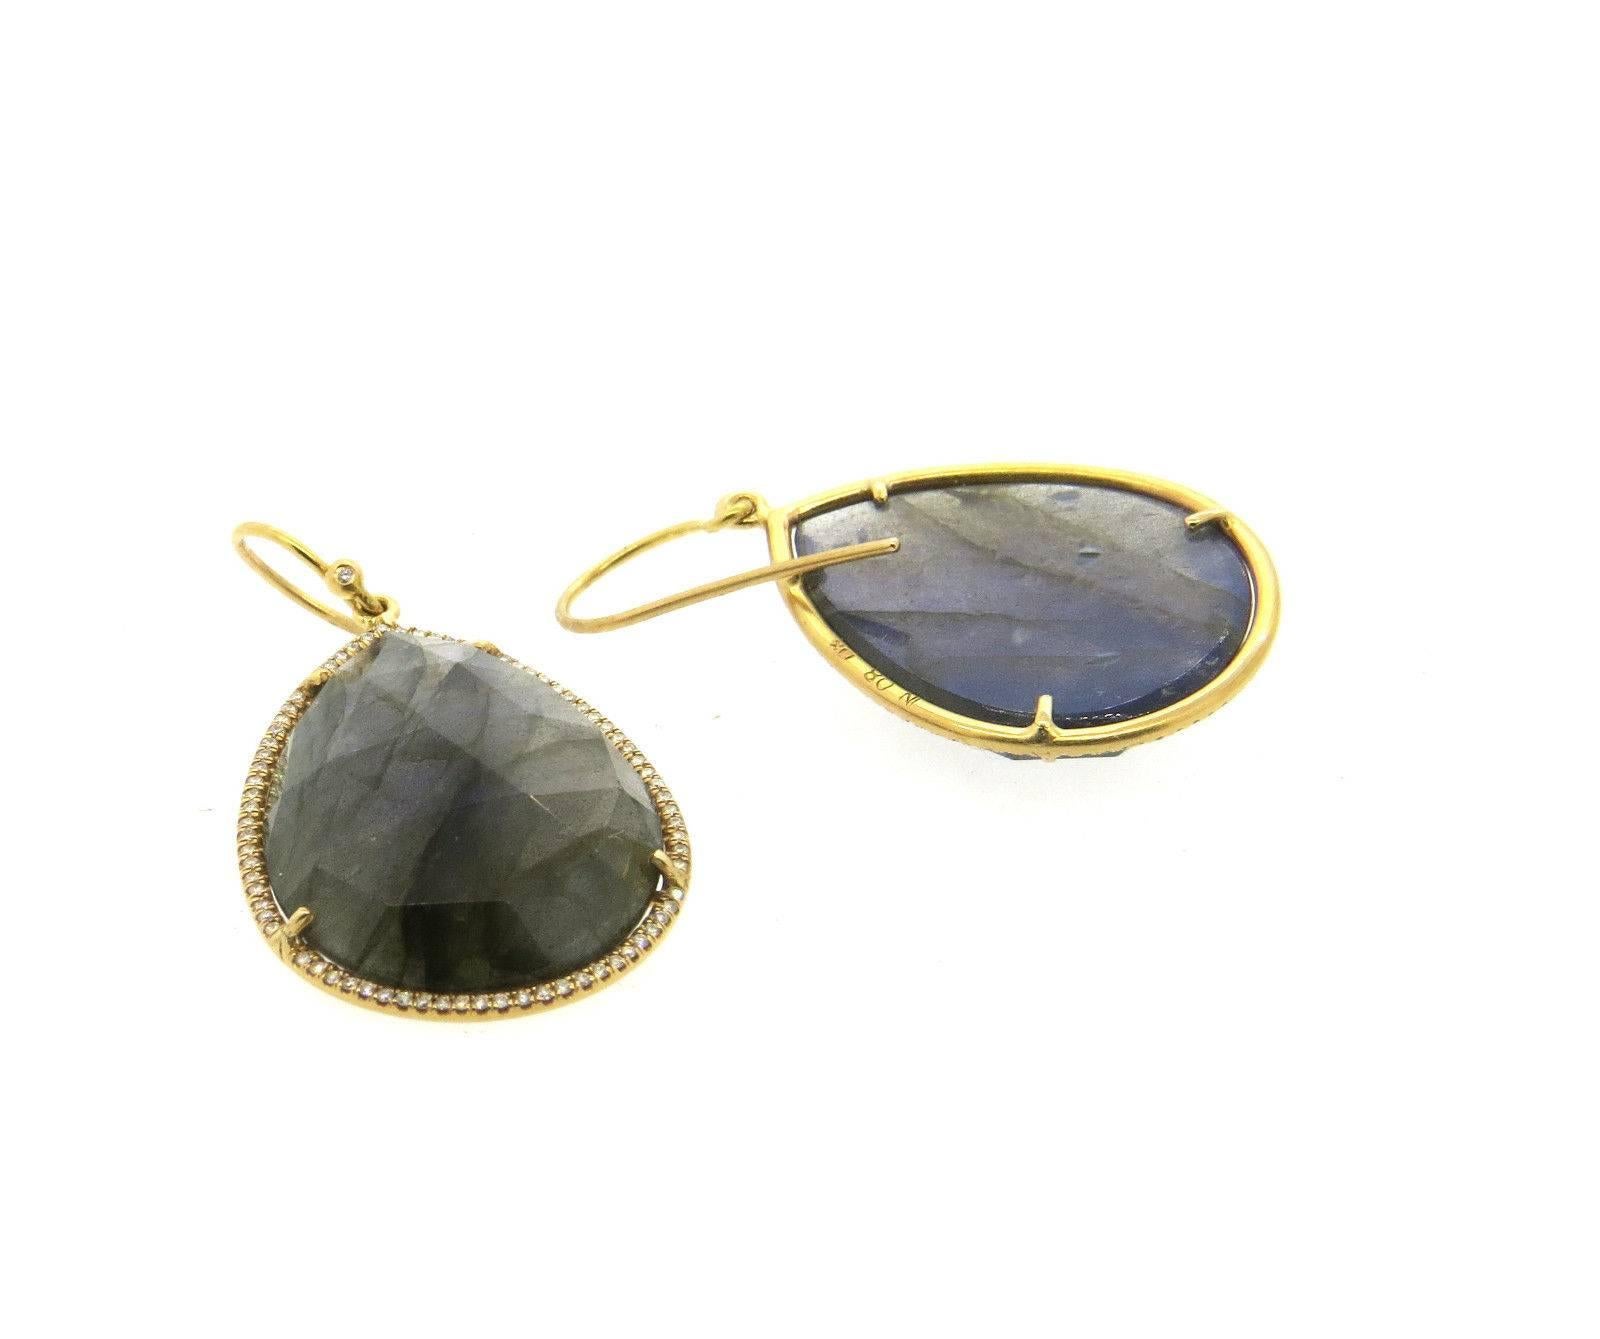 A pair of 18k yellow gold earrings set with labradorite and approximately 1.29ctw of G/VS diamonds.  Crafted by Irene Neuwirth, the earrings measure 43mm long with wires x 24mm wide.  Marked: IN 08 18k.  The weight of the piece is 15.4 grams.